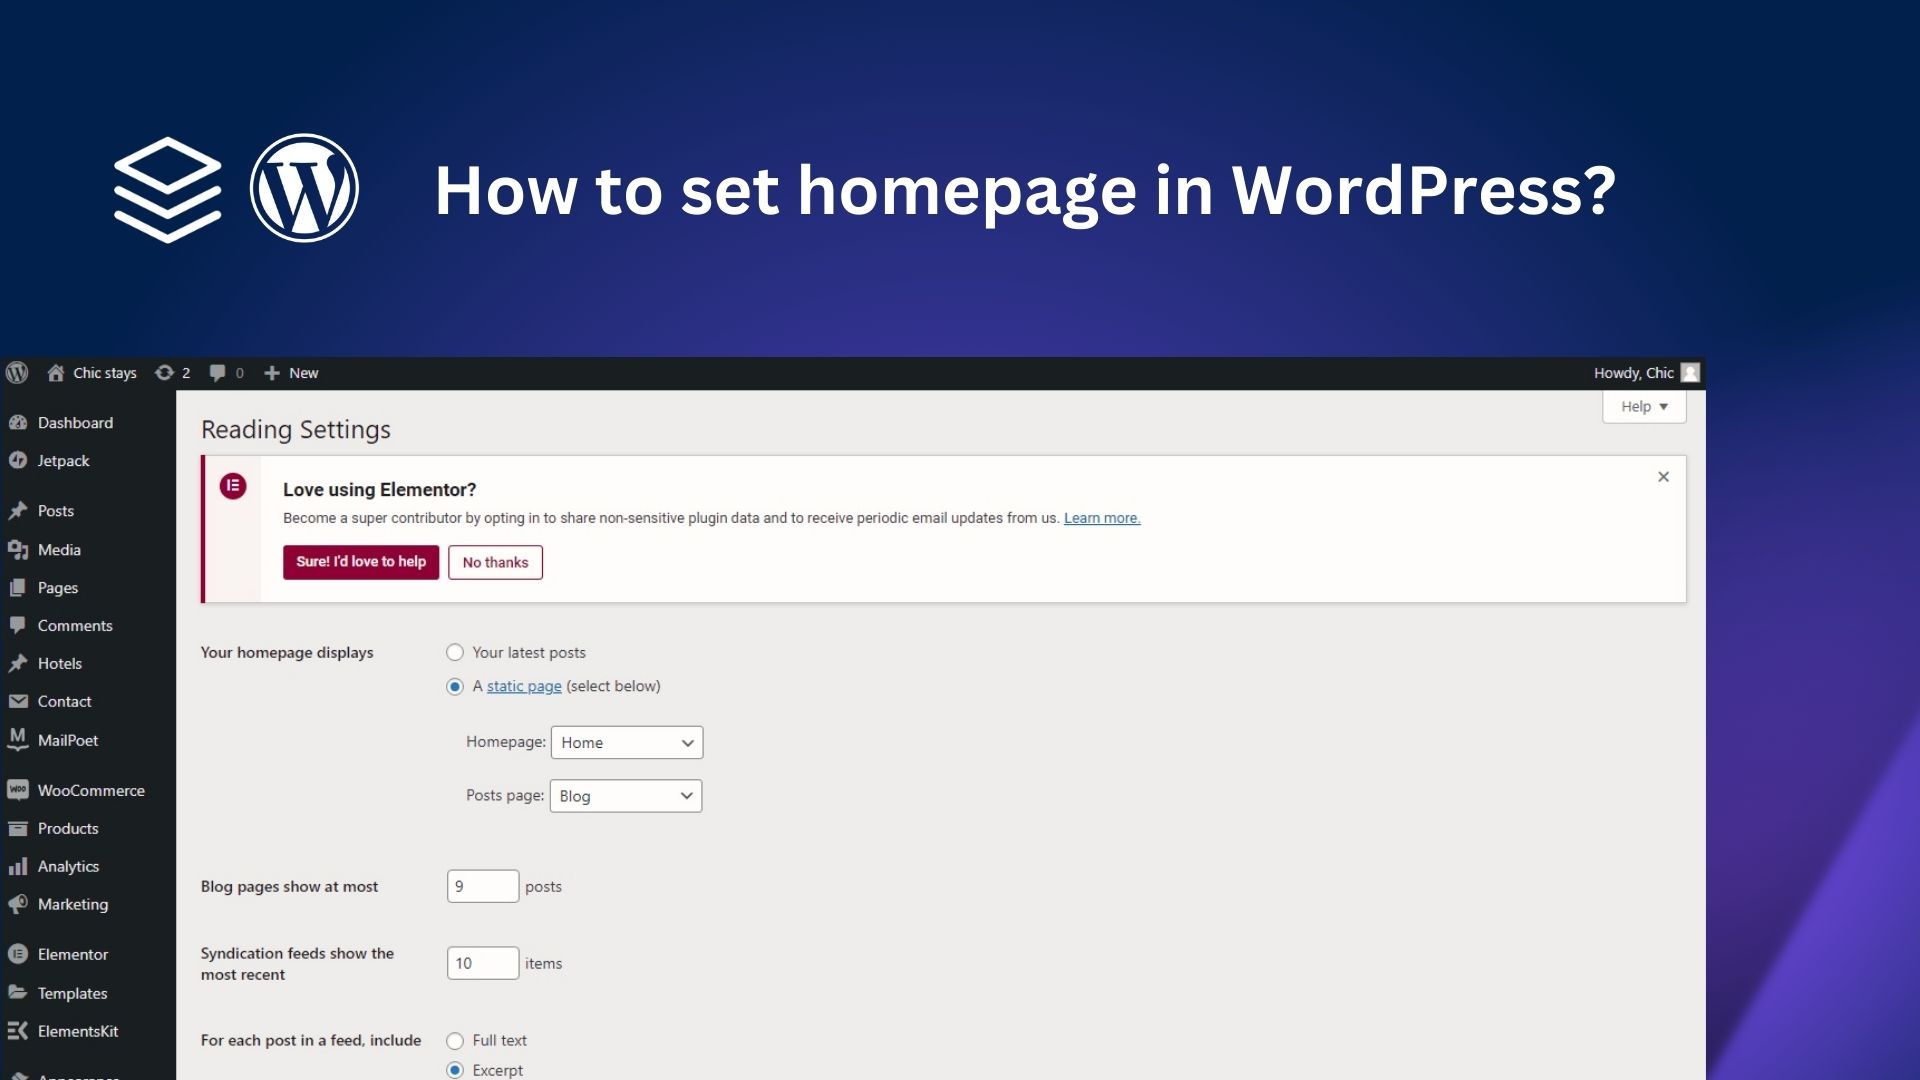 How to set homepage in WordPress